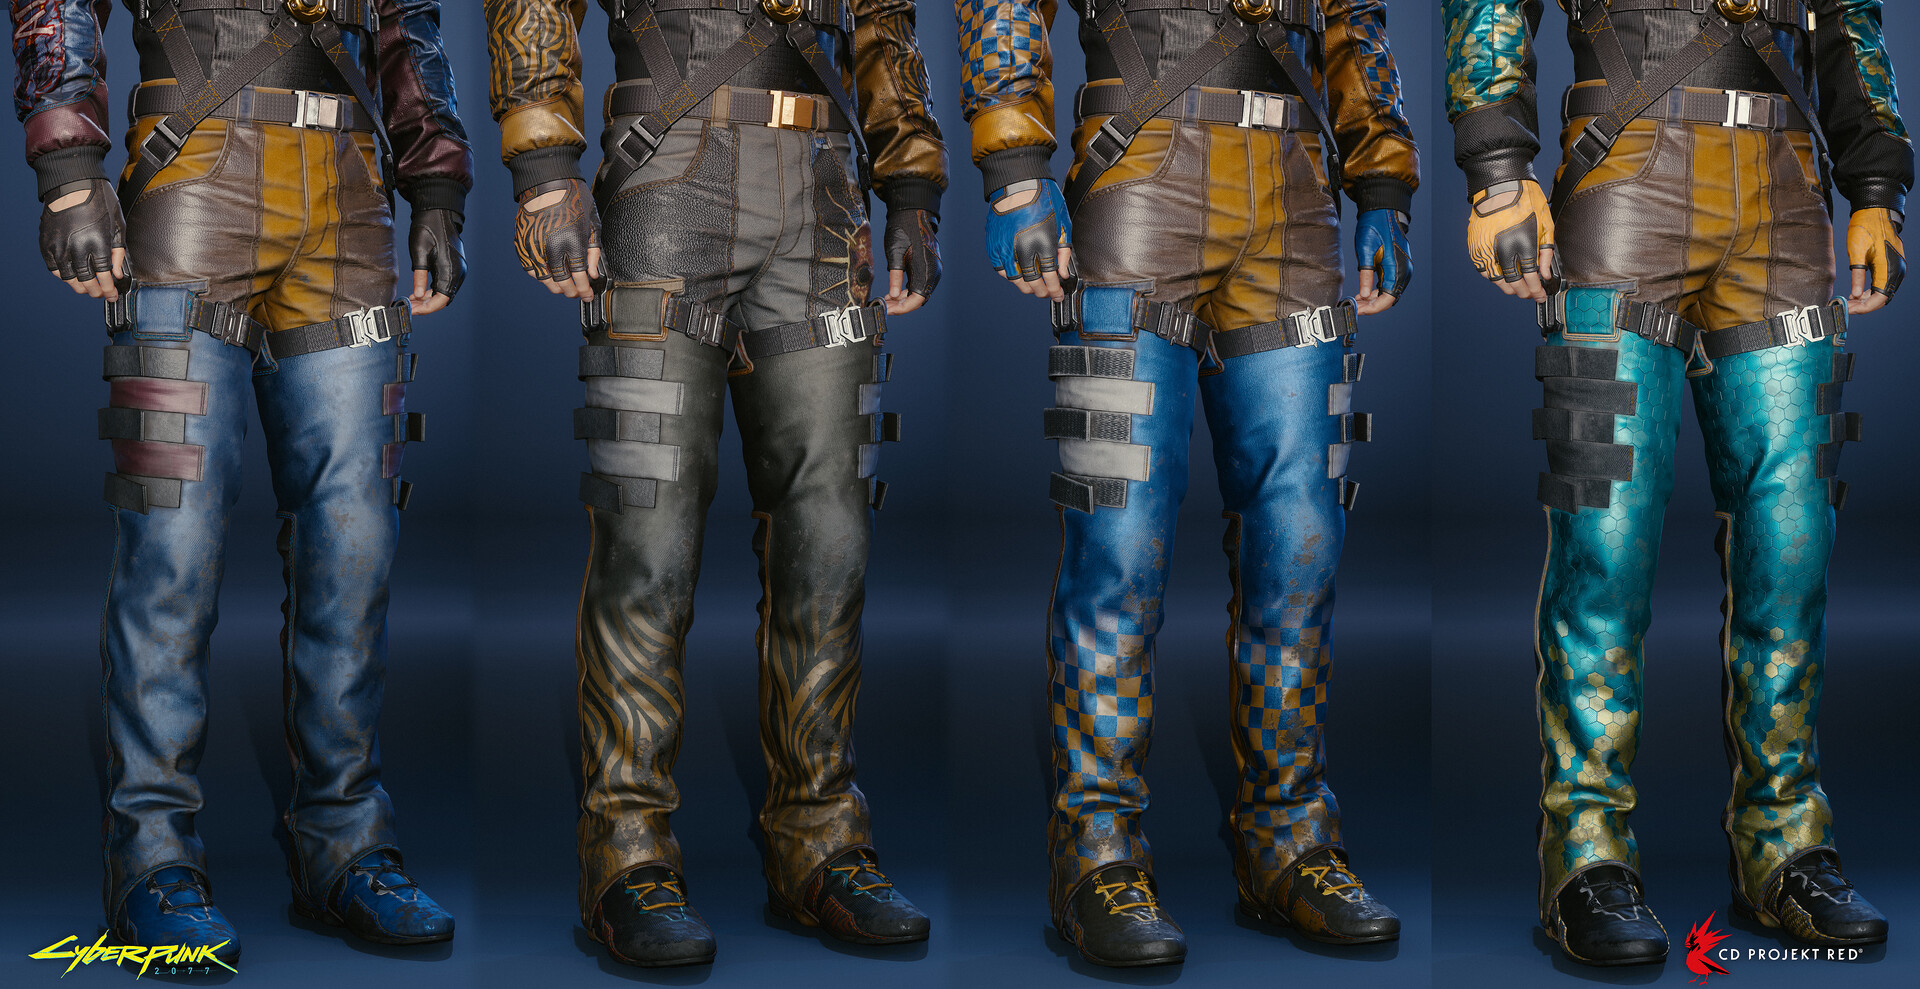 Aldecaldos racing jacket and pants which I created for Cyberpunk 2077. 